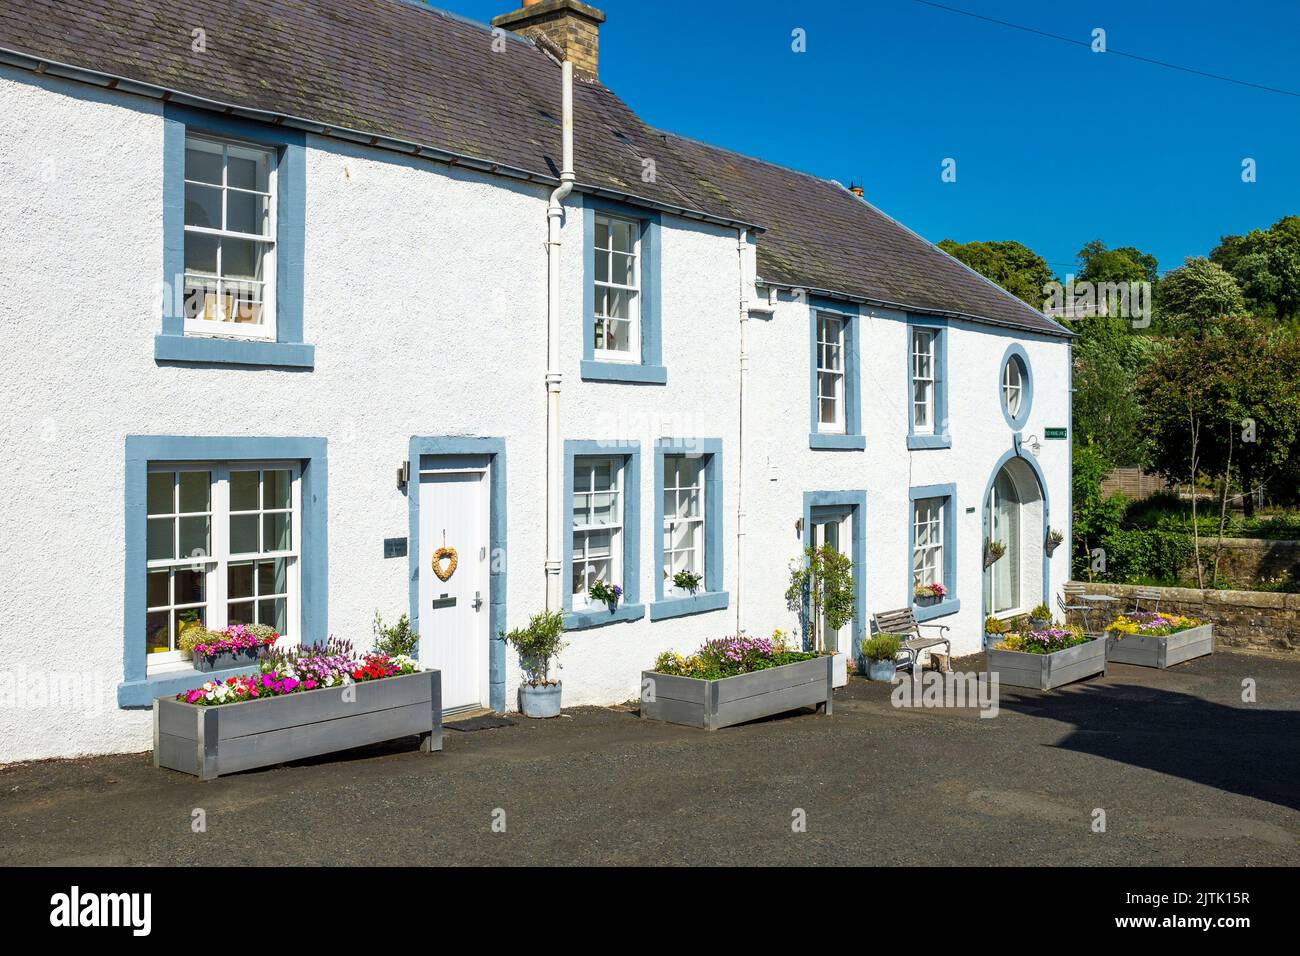 Row of cottages in the Scottish Borders town of Hawick, Scotland, UK Stock Photo